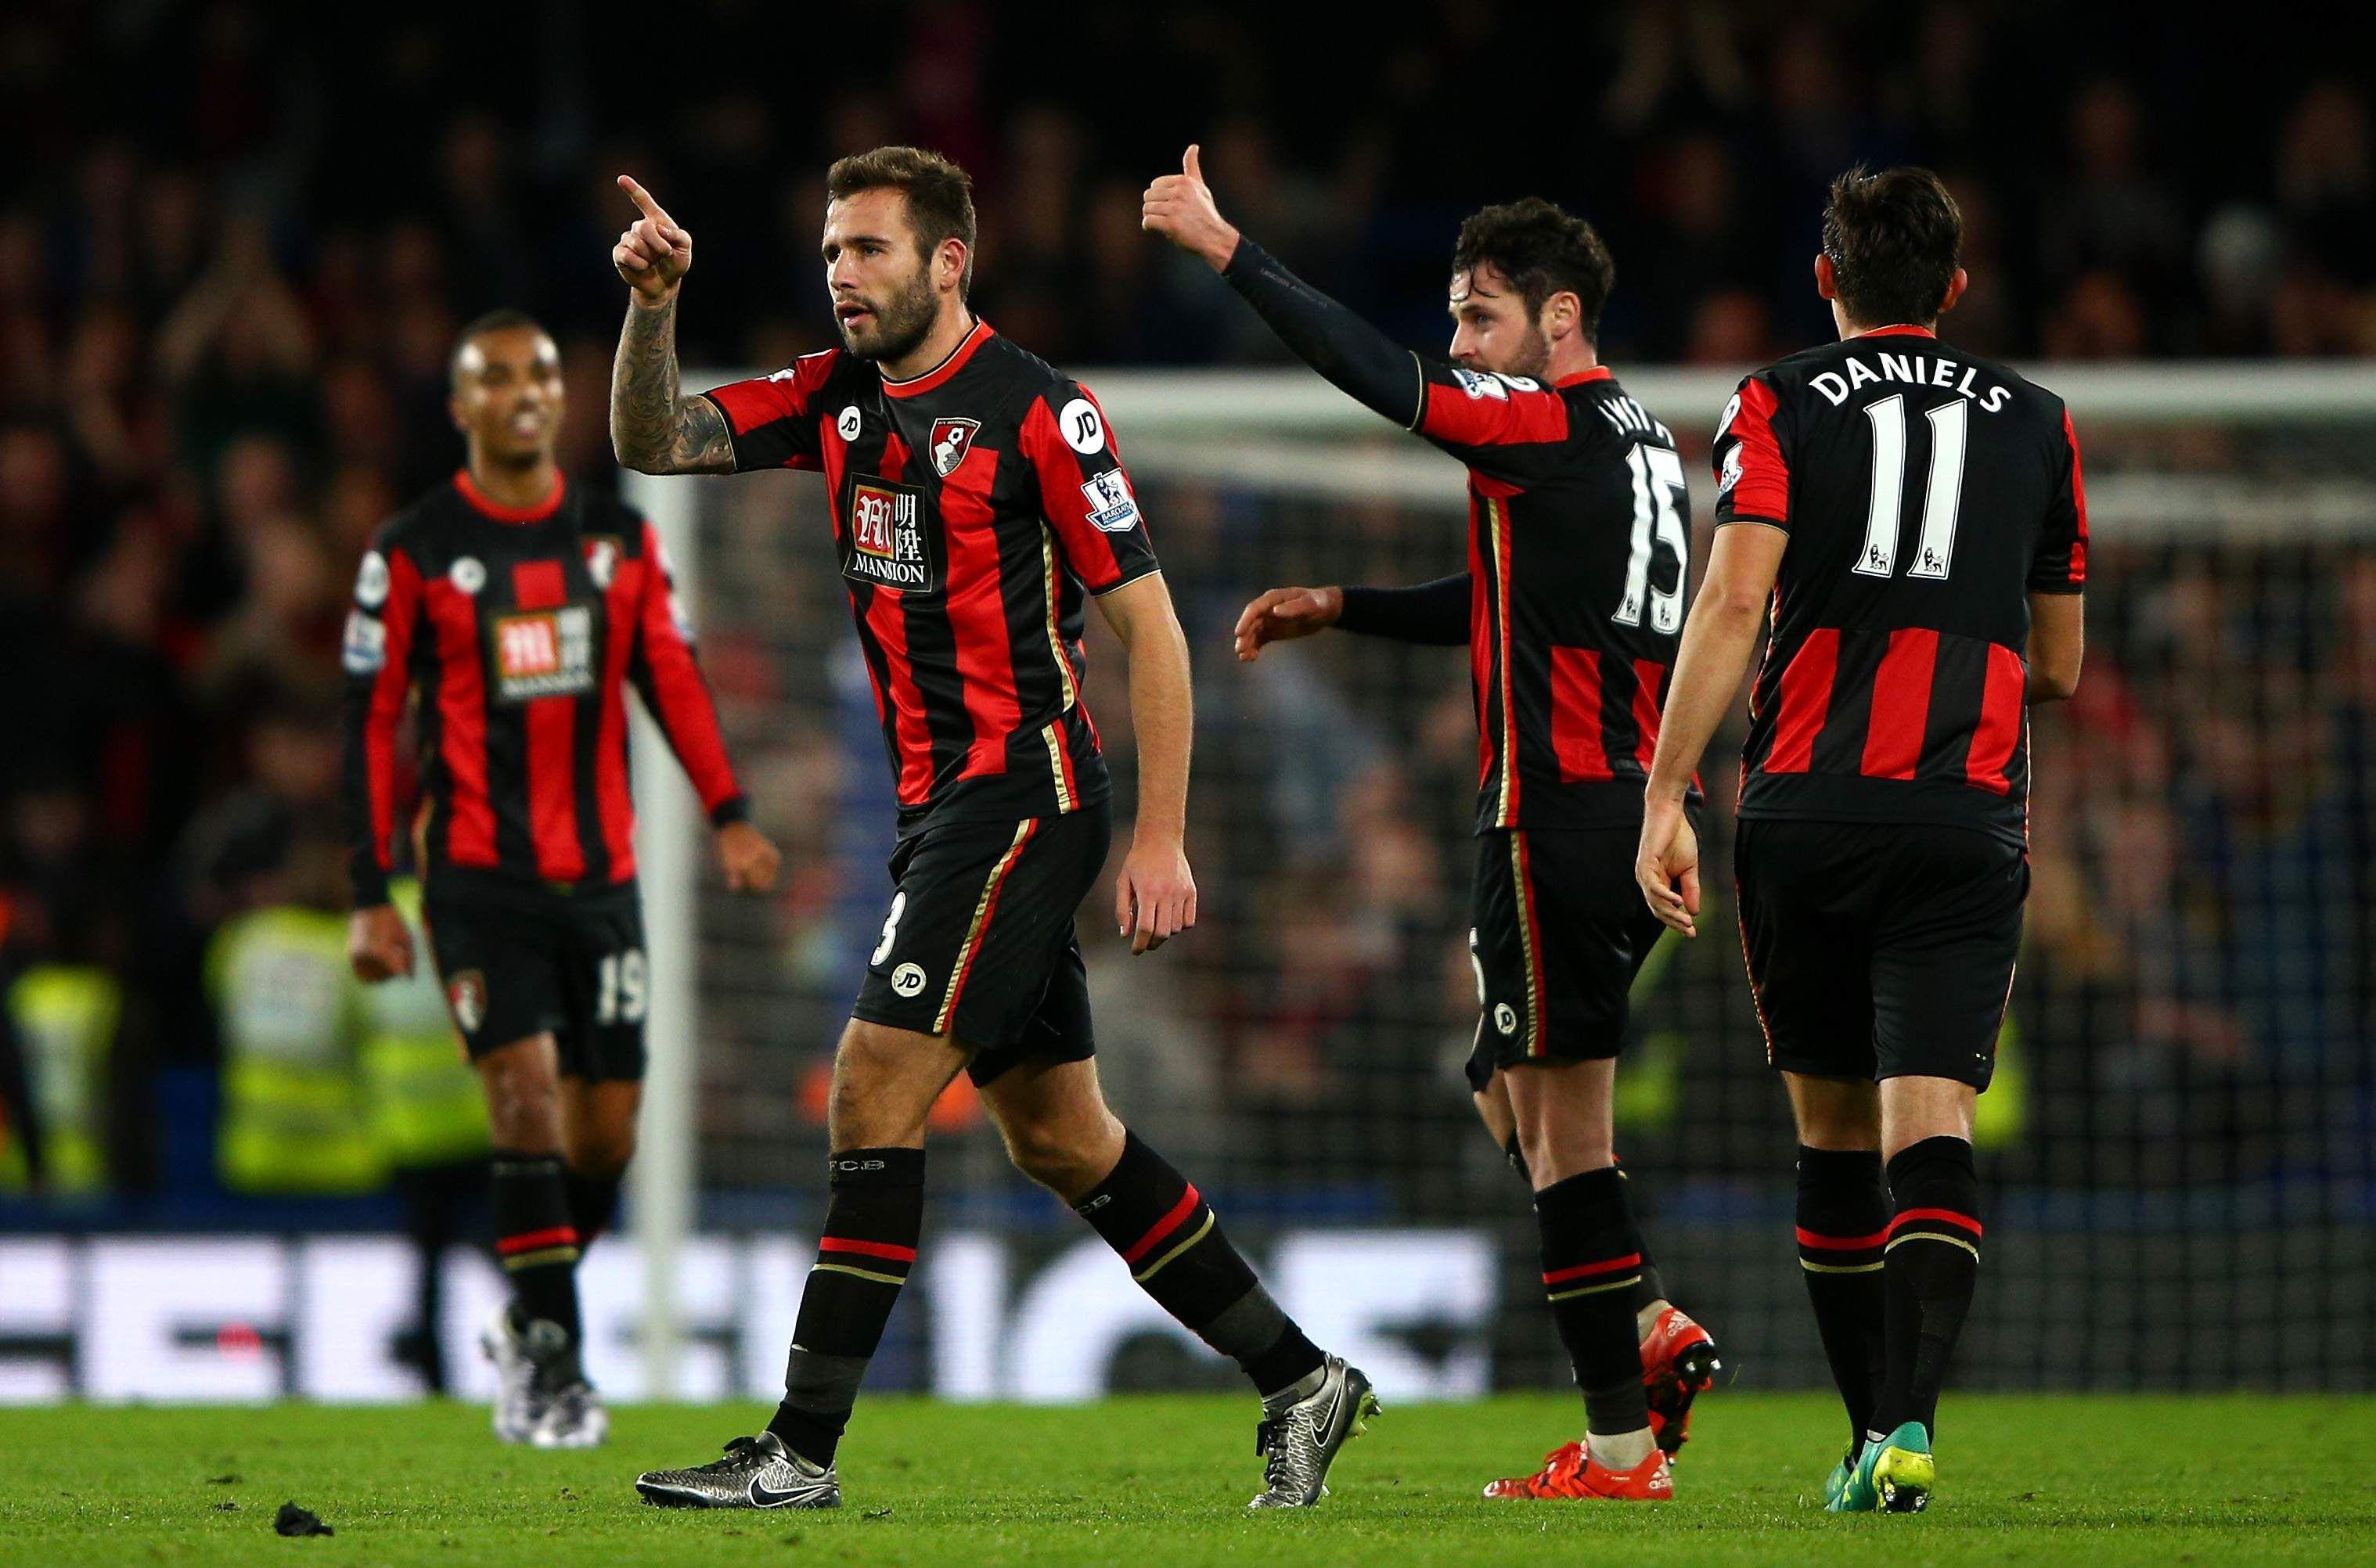 AFC Bournemouth Wallpaper Image Photo Picture Background